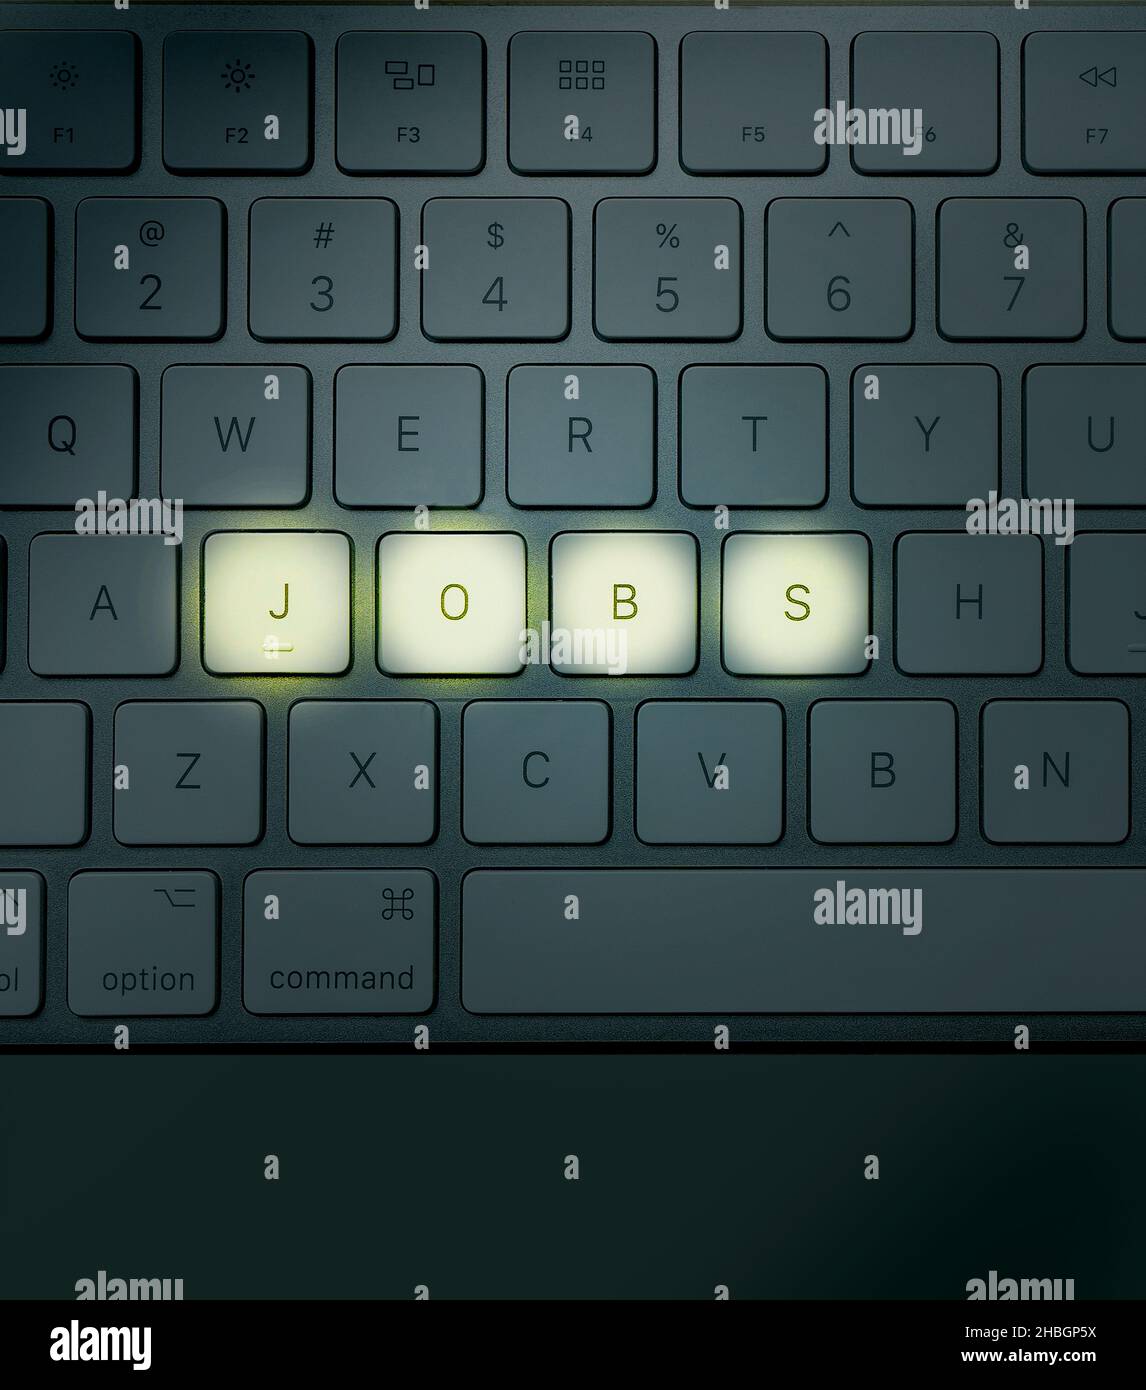 Concept image of laptop keyboard with the word jobs lit up depicting the offers and search for employment Stock Photo